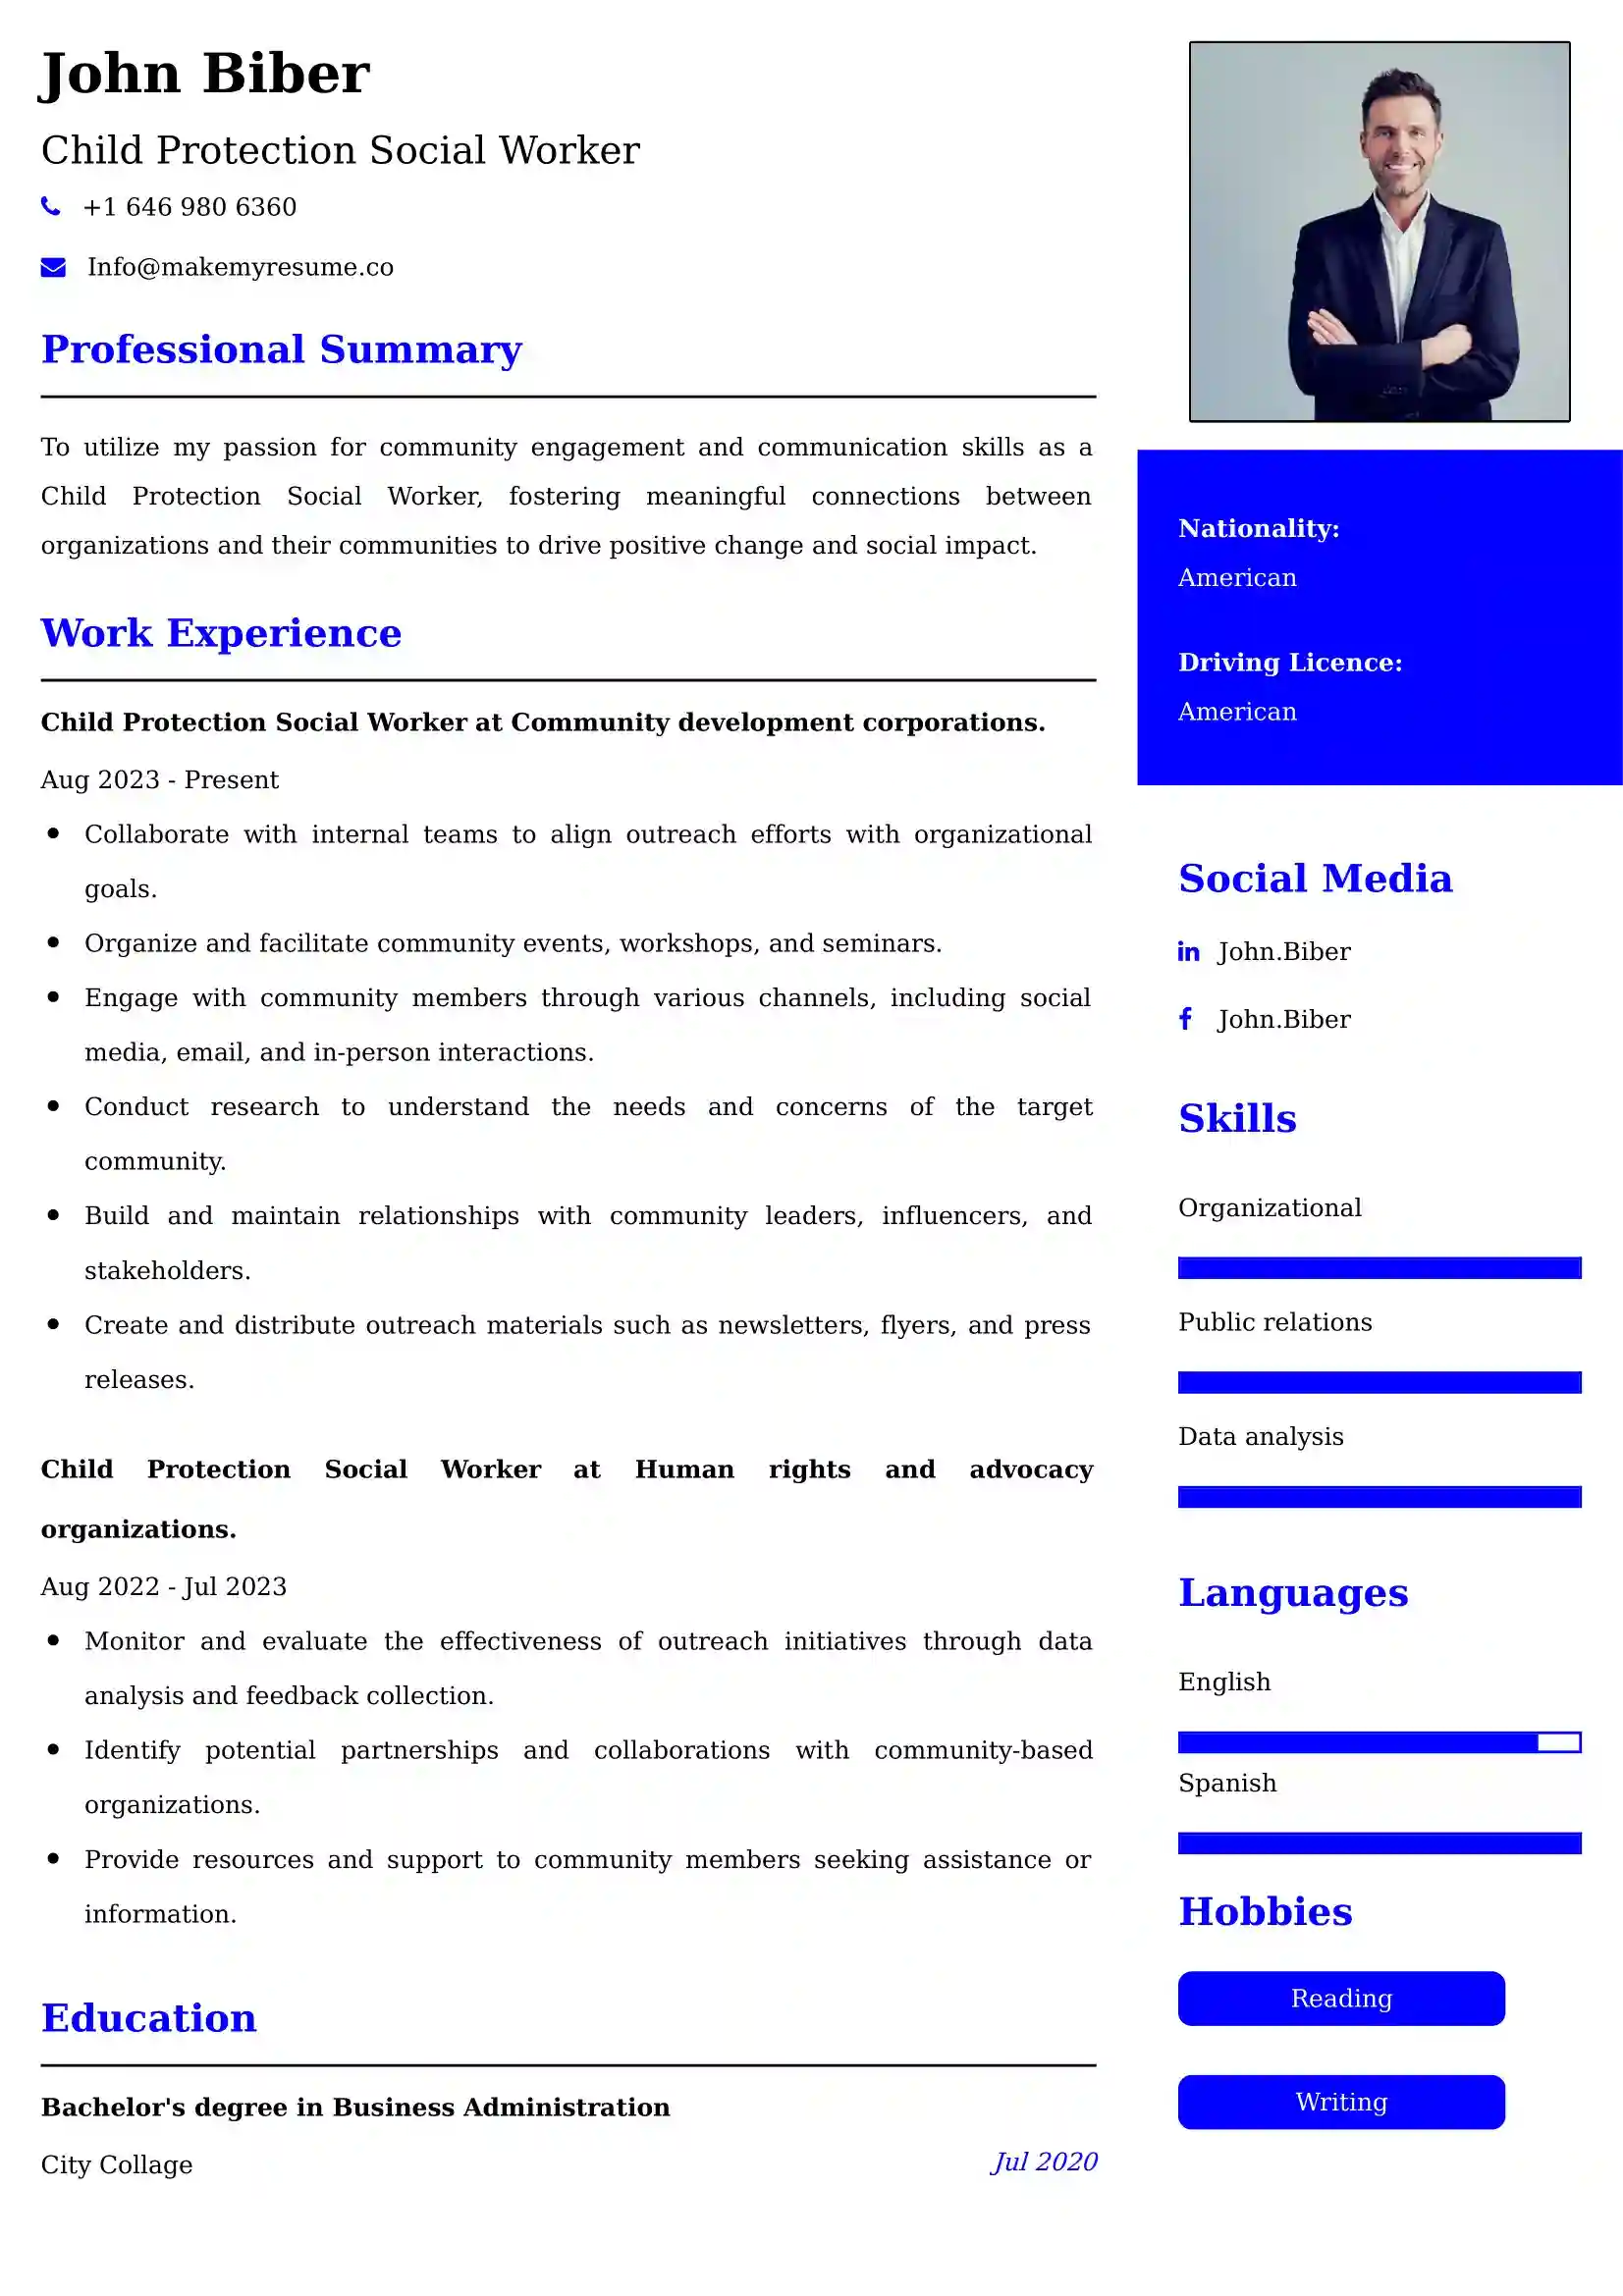 Best Child Protection Social Worker Resume Examples for UK